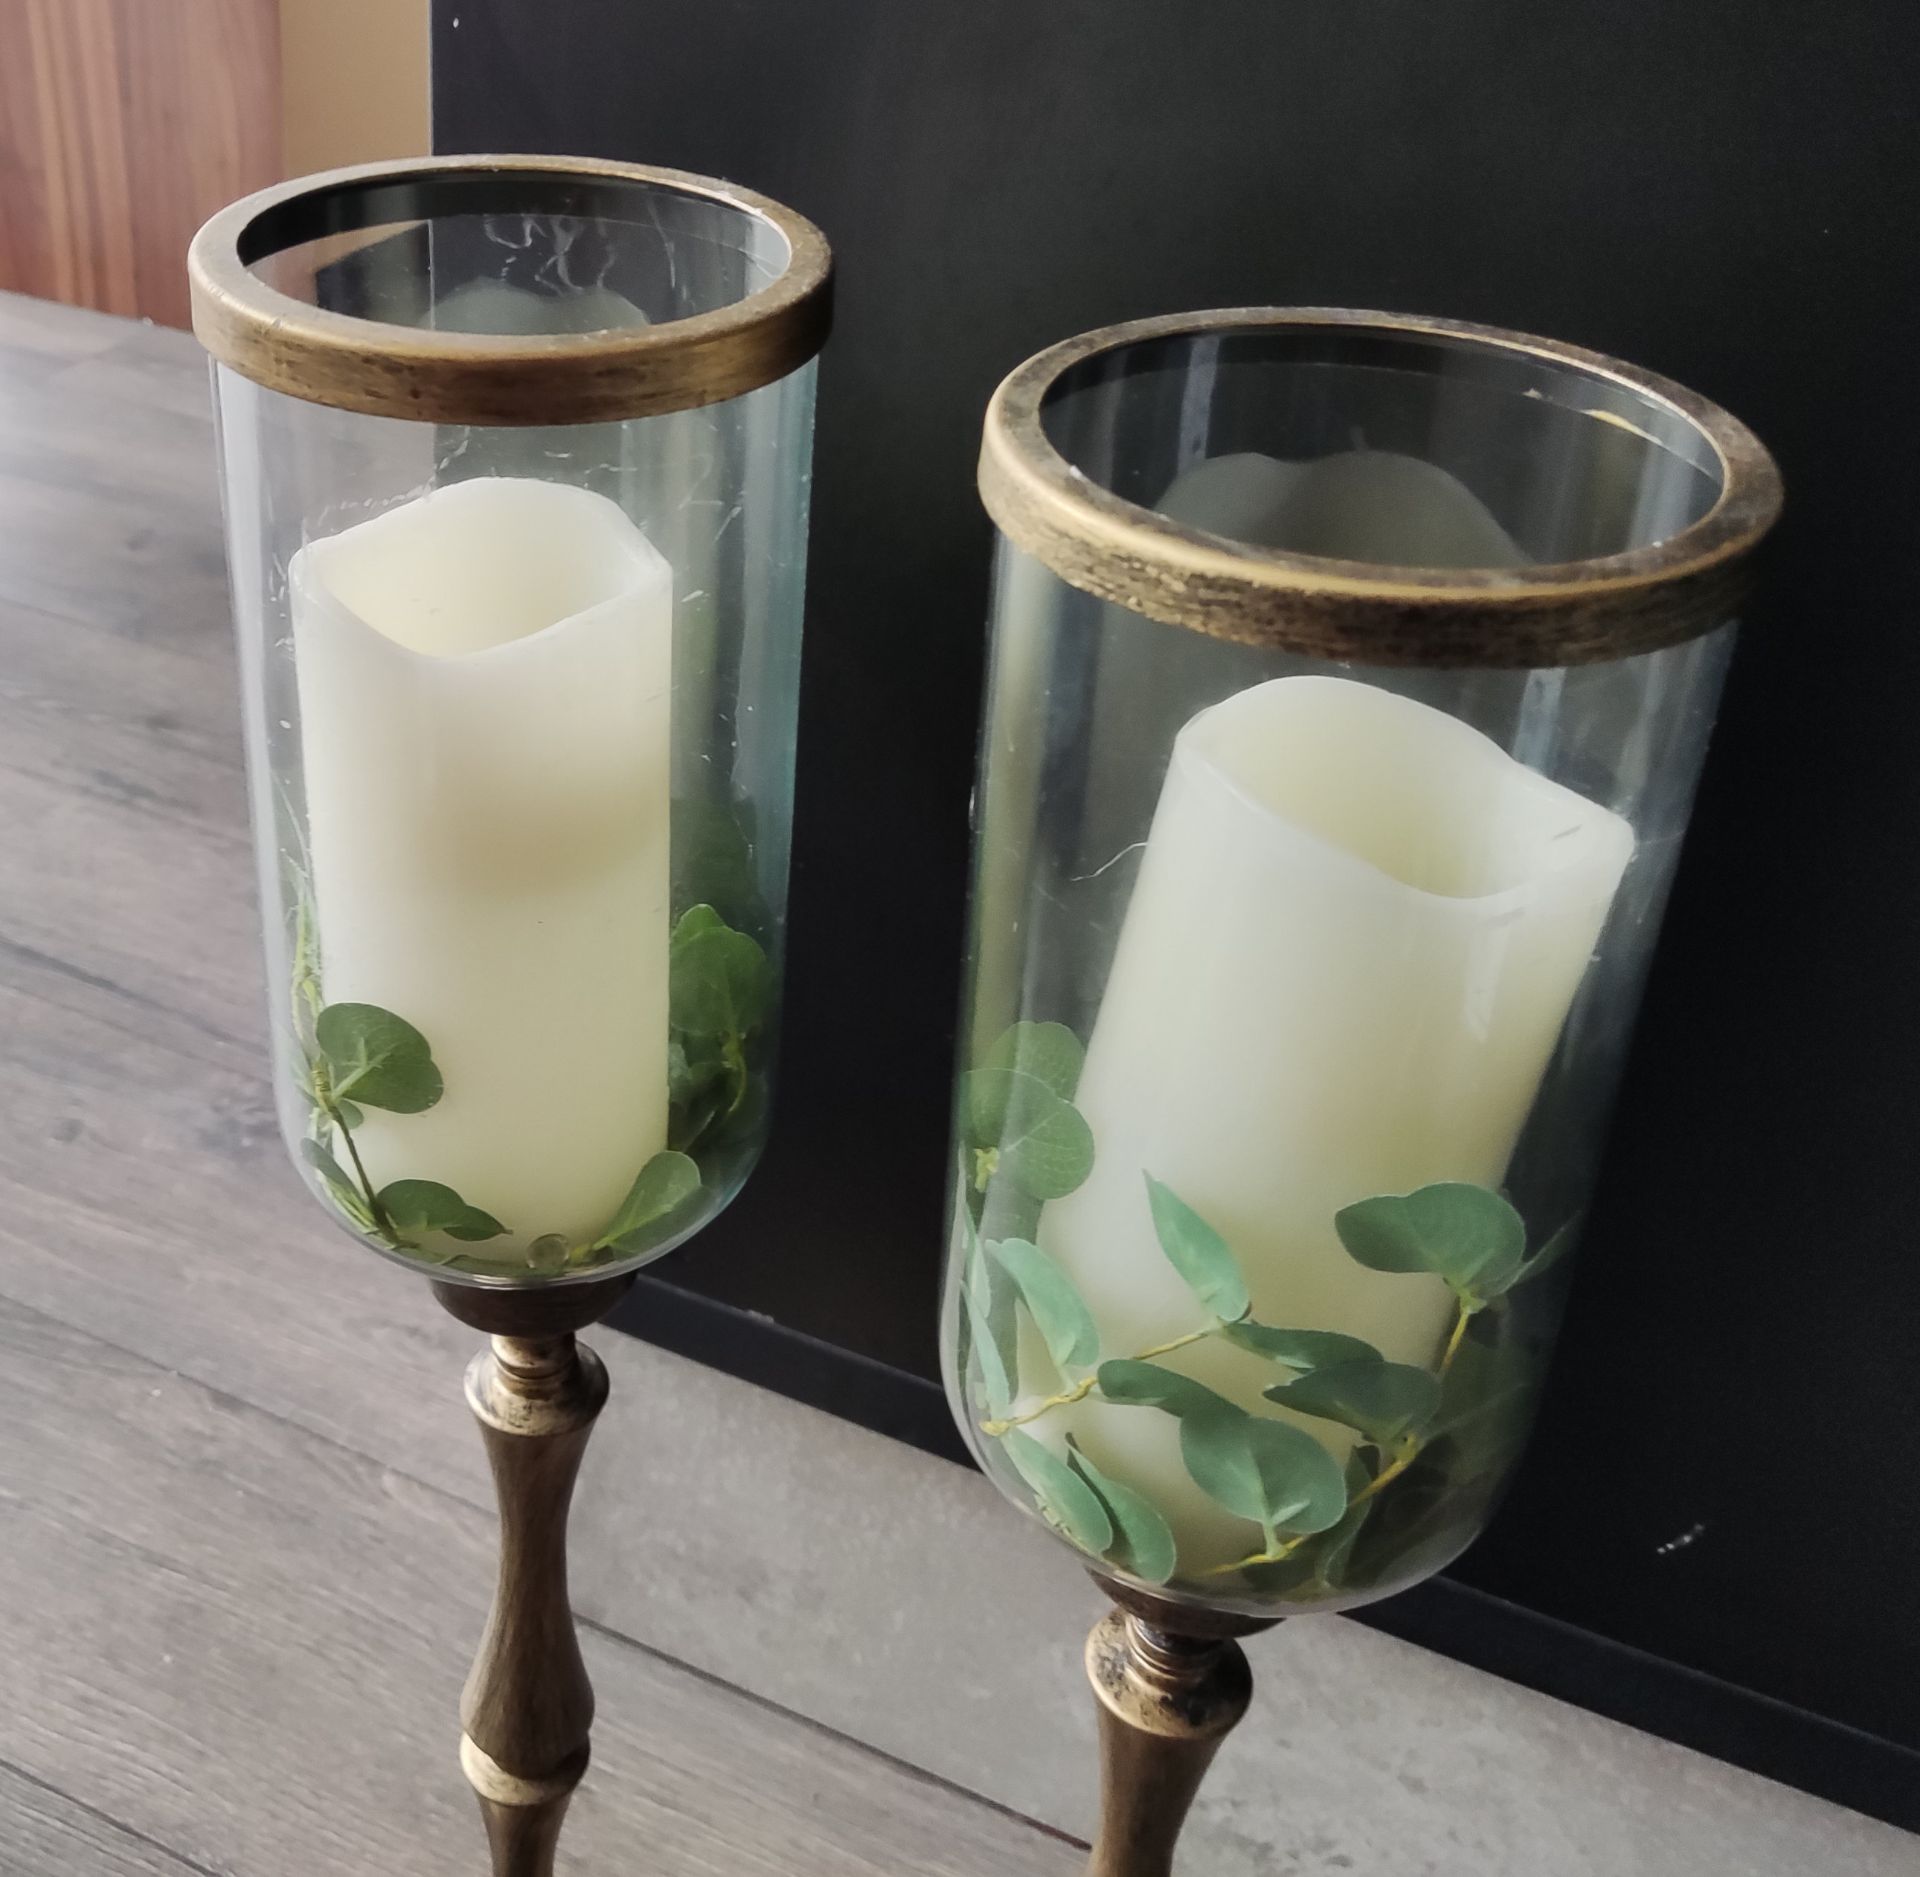 3 x Tall Standing Hurricane Vases - Suitable for Pillar Candles And Tea Lights - LBCTBC - CL763- Loc - Image 4 of 5